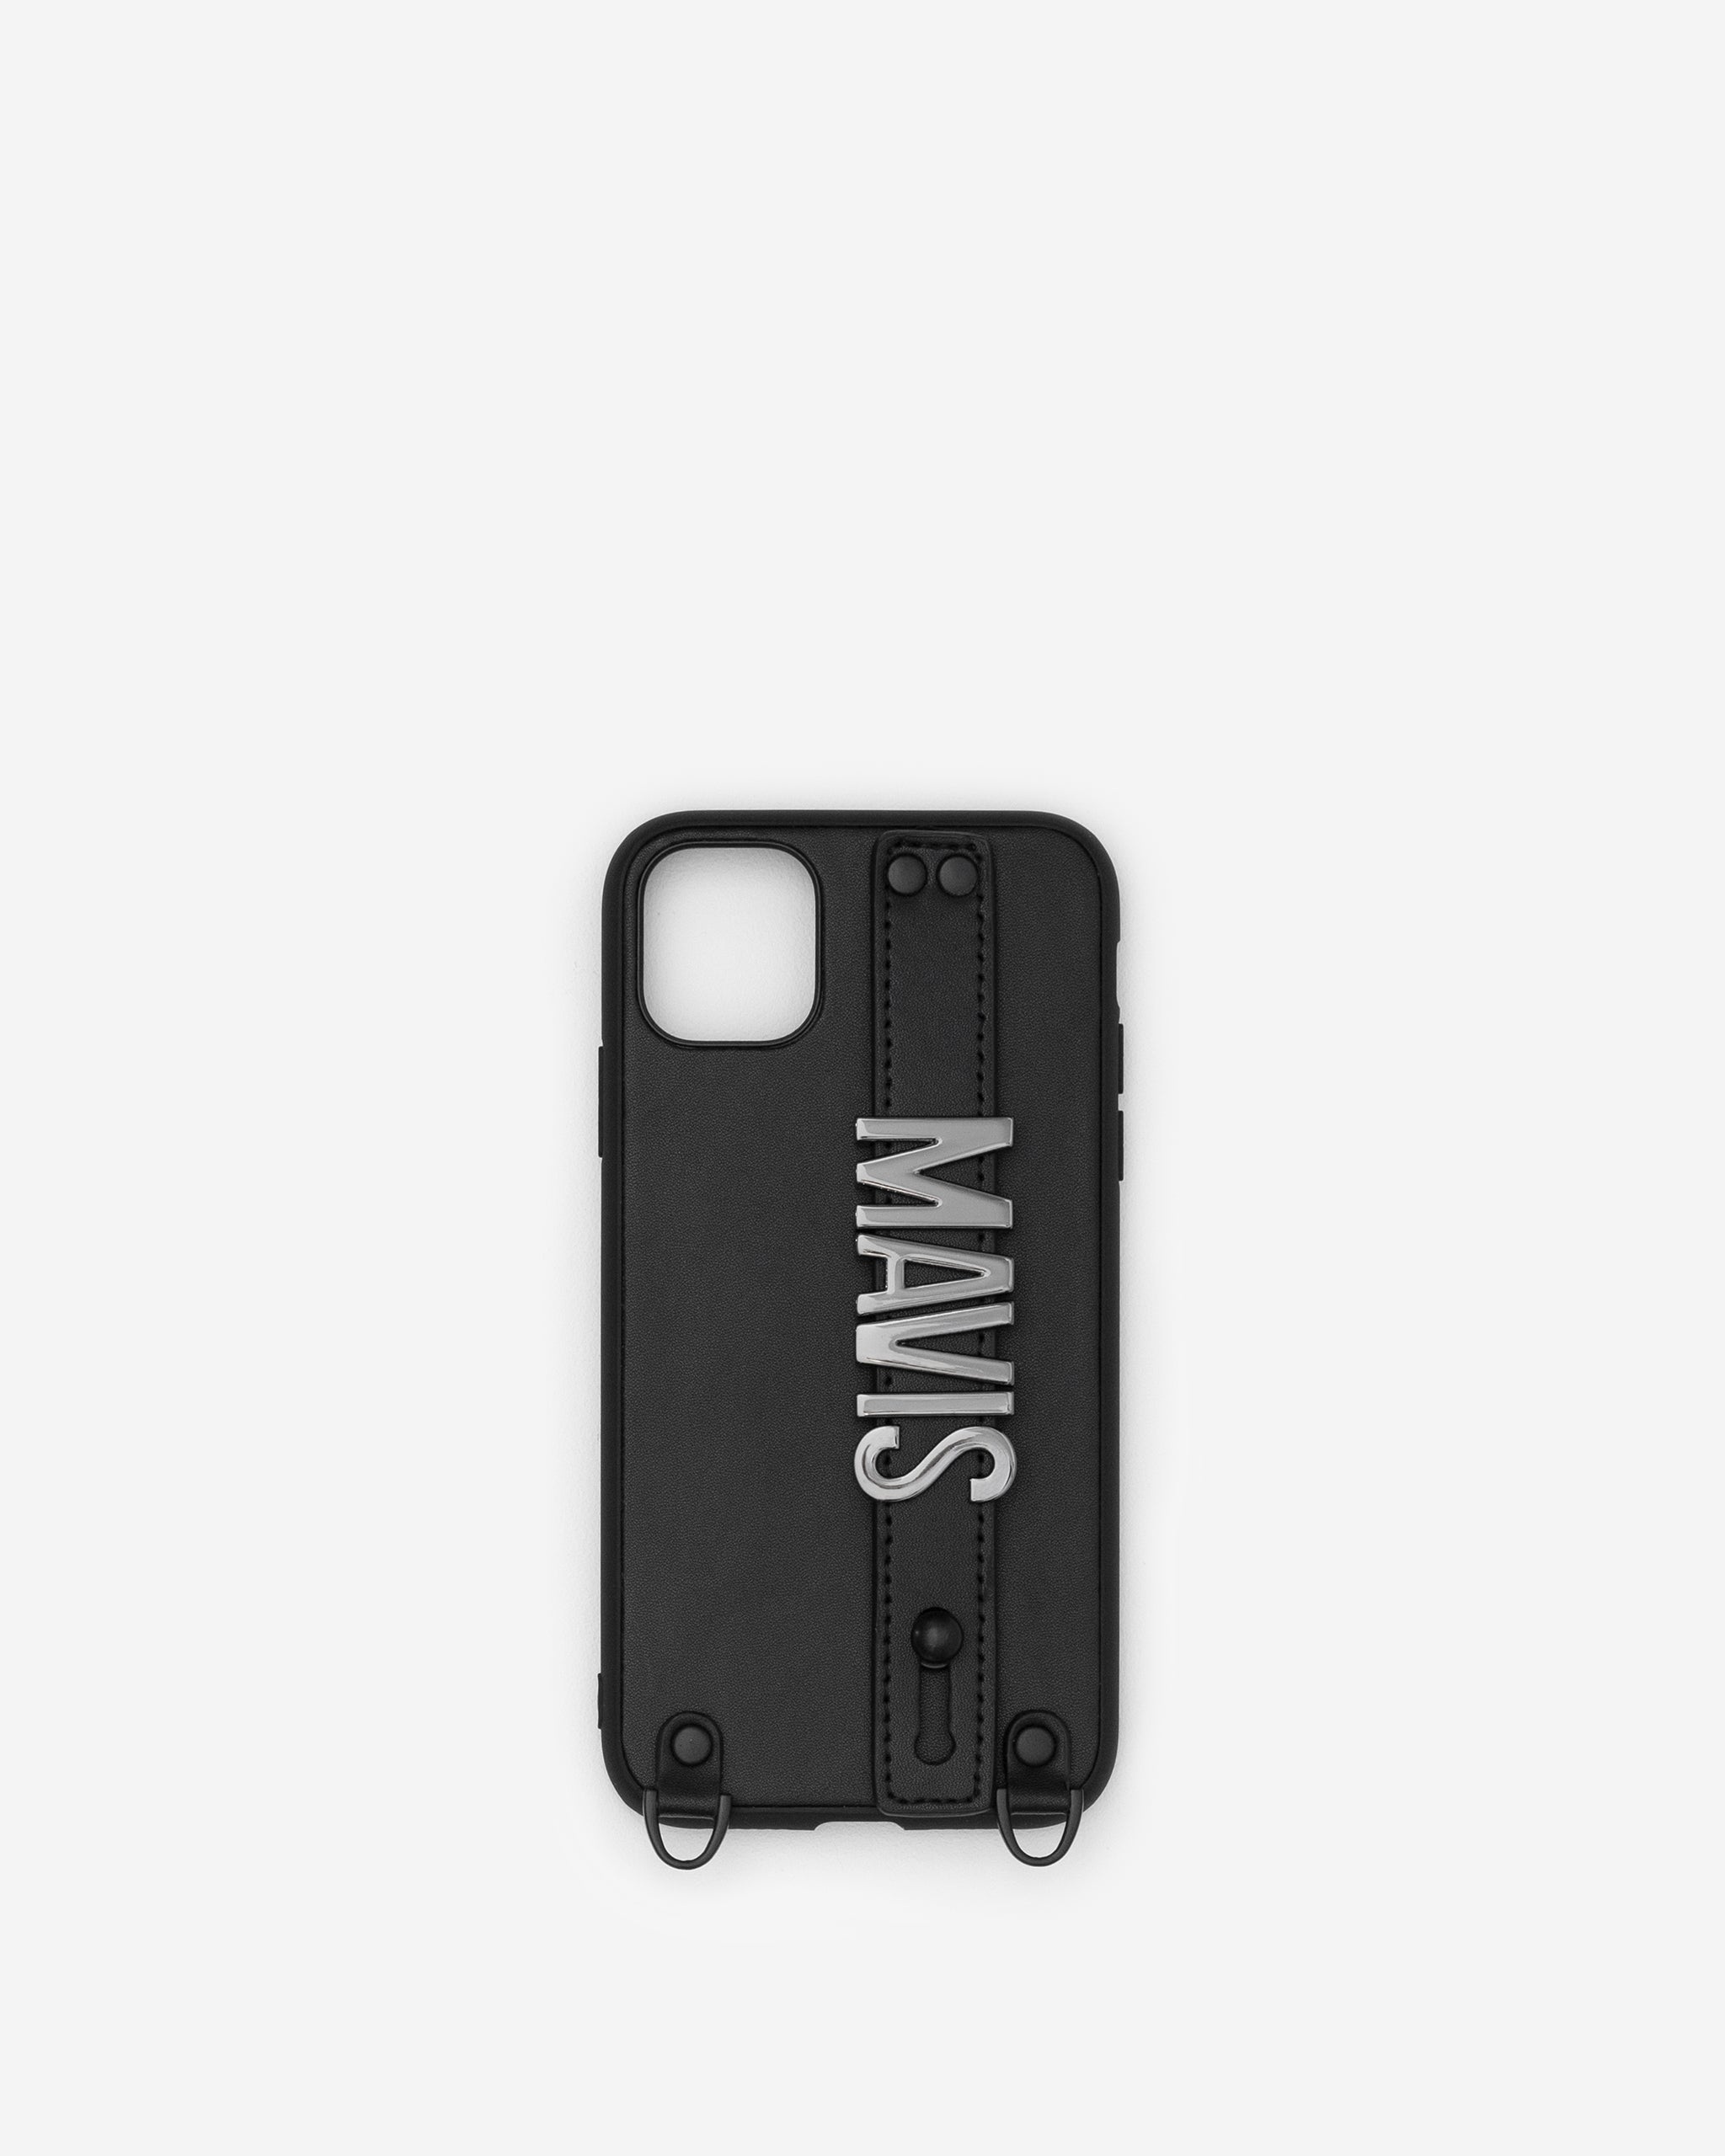 iPhone 11 Case in Black/Gunmetal with Personalised Hardware